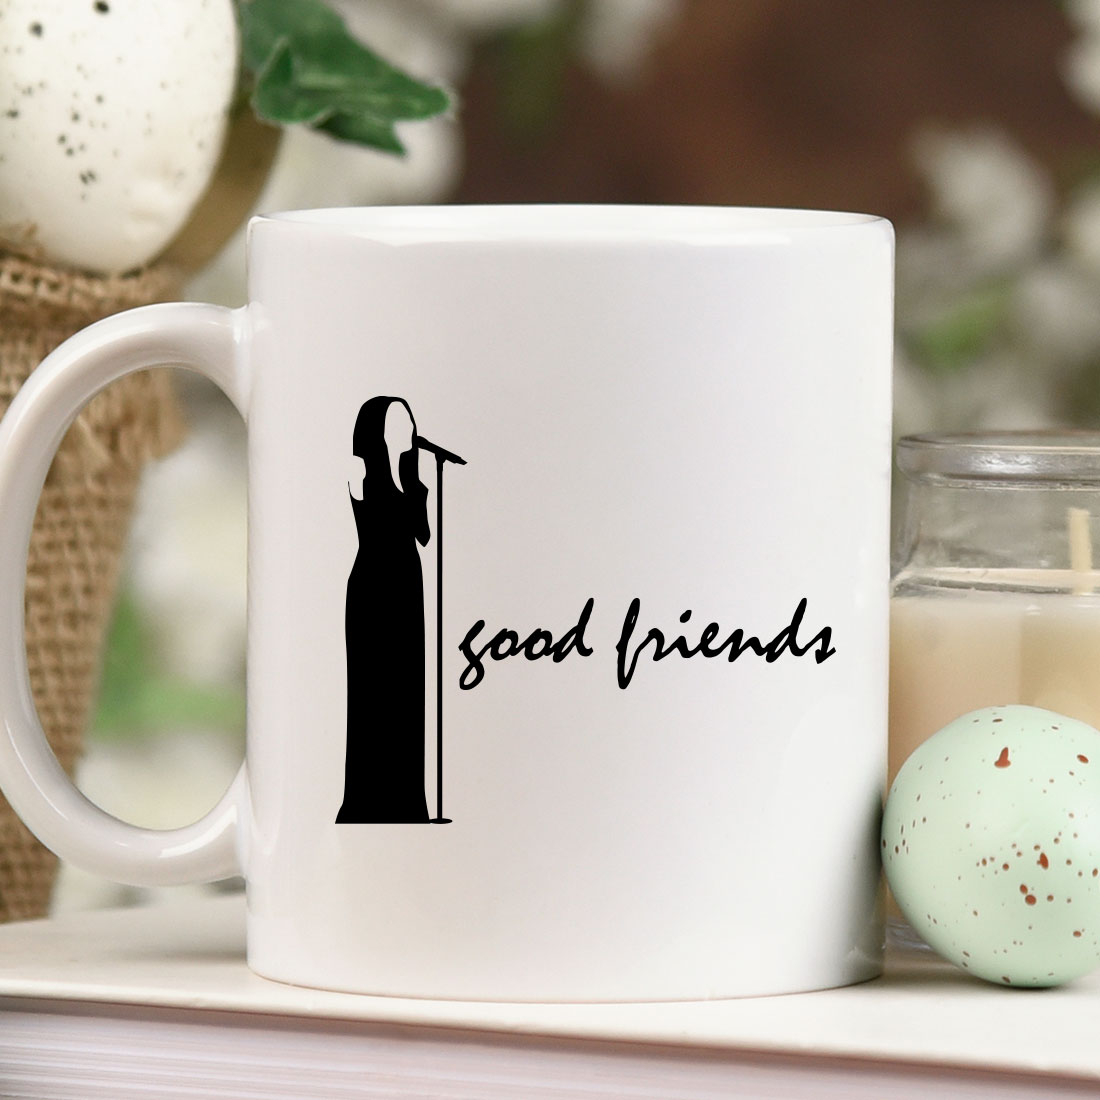 White coffee mug with the words good friends on it.